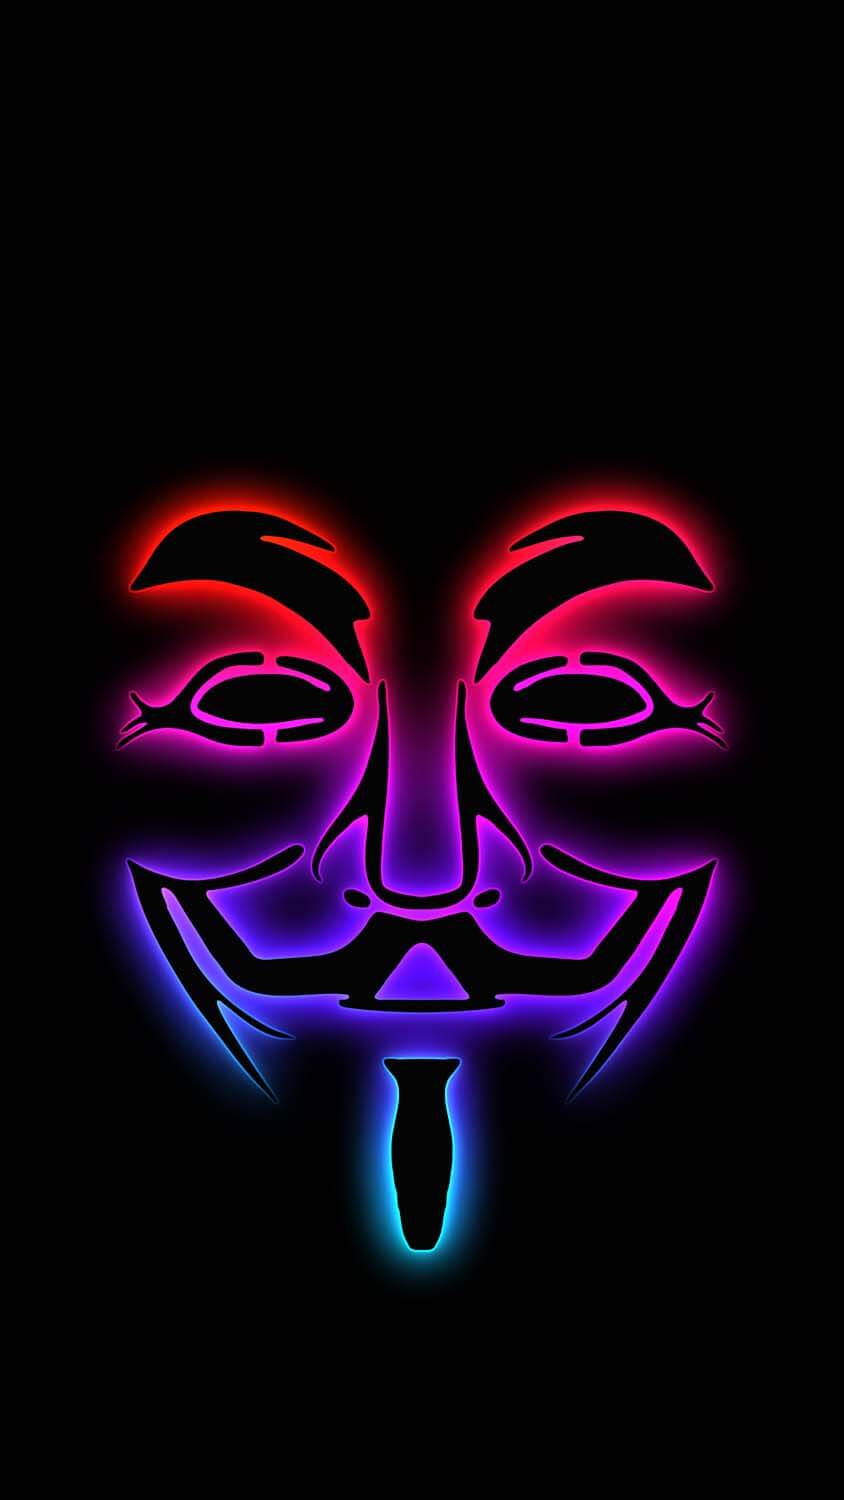 The Anonymous iPhone Wallpaper HD